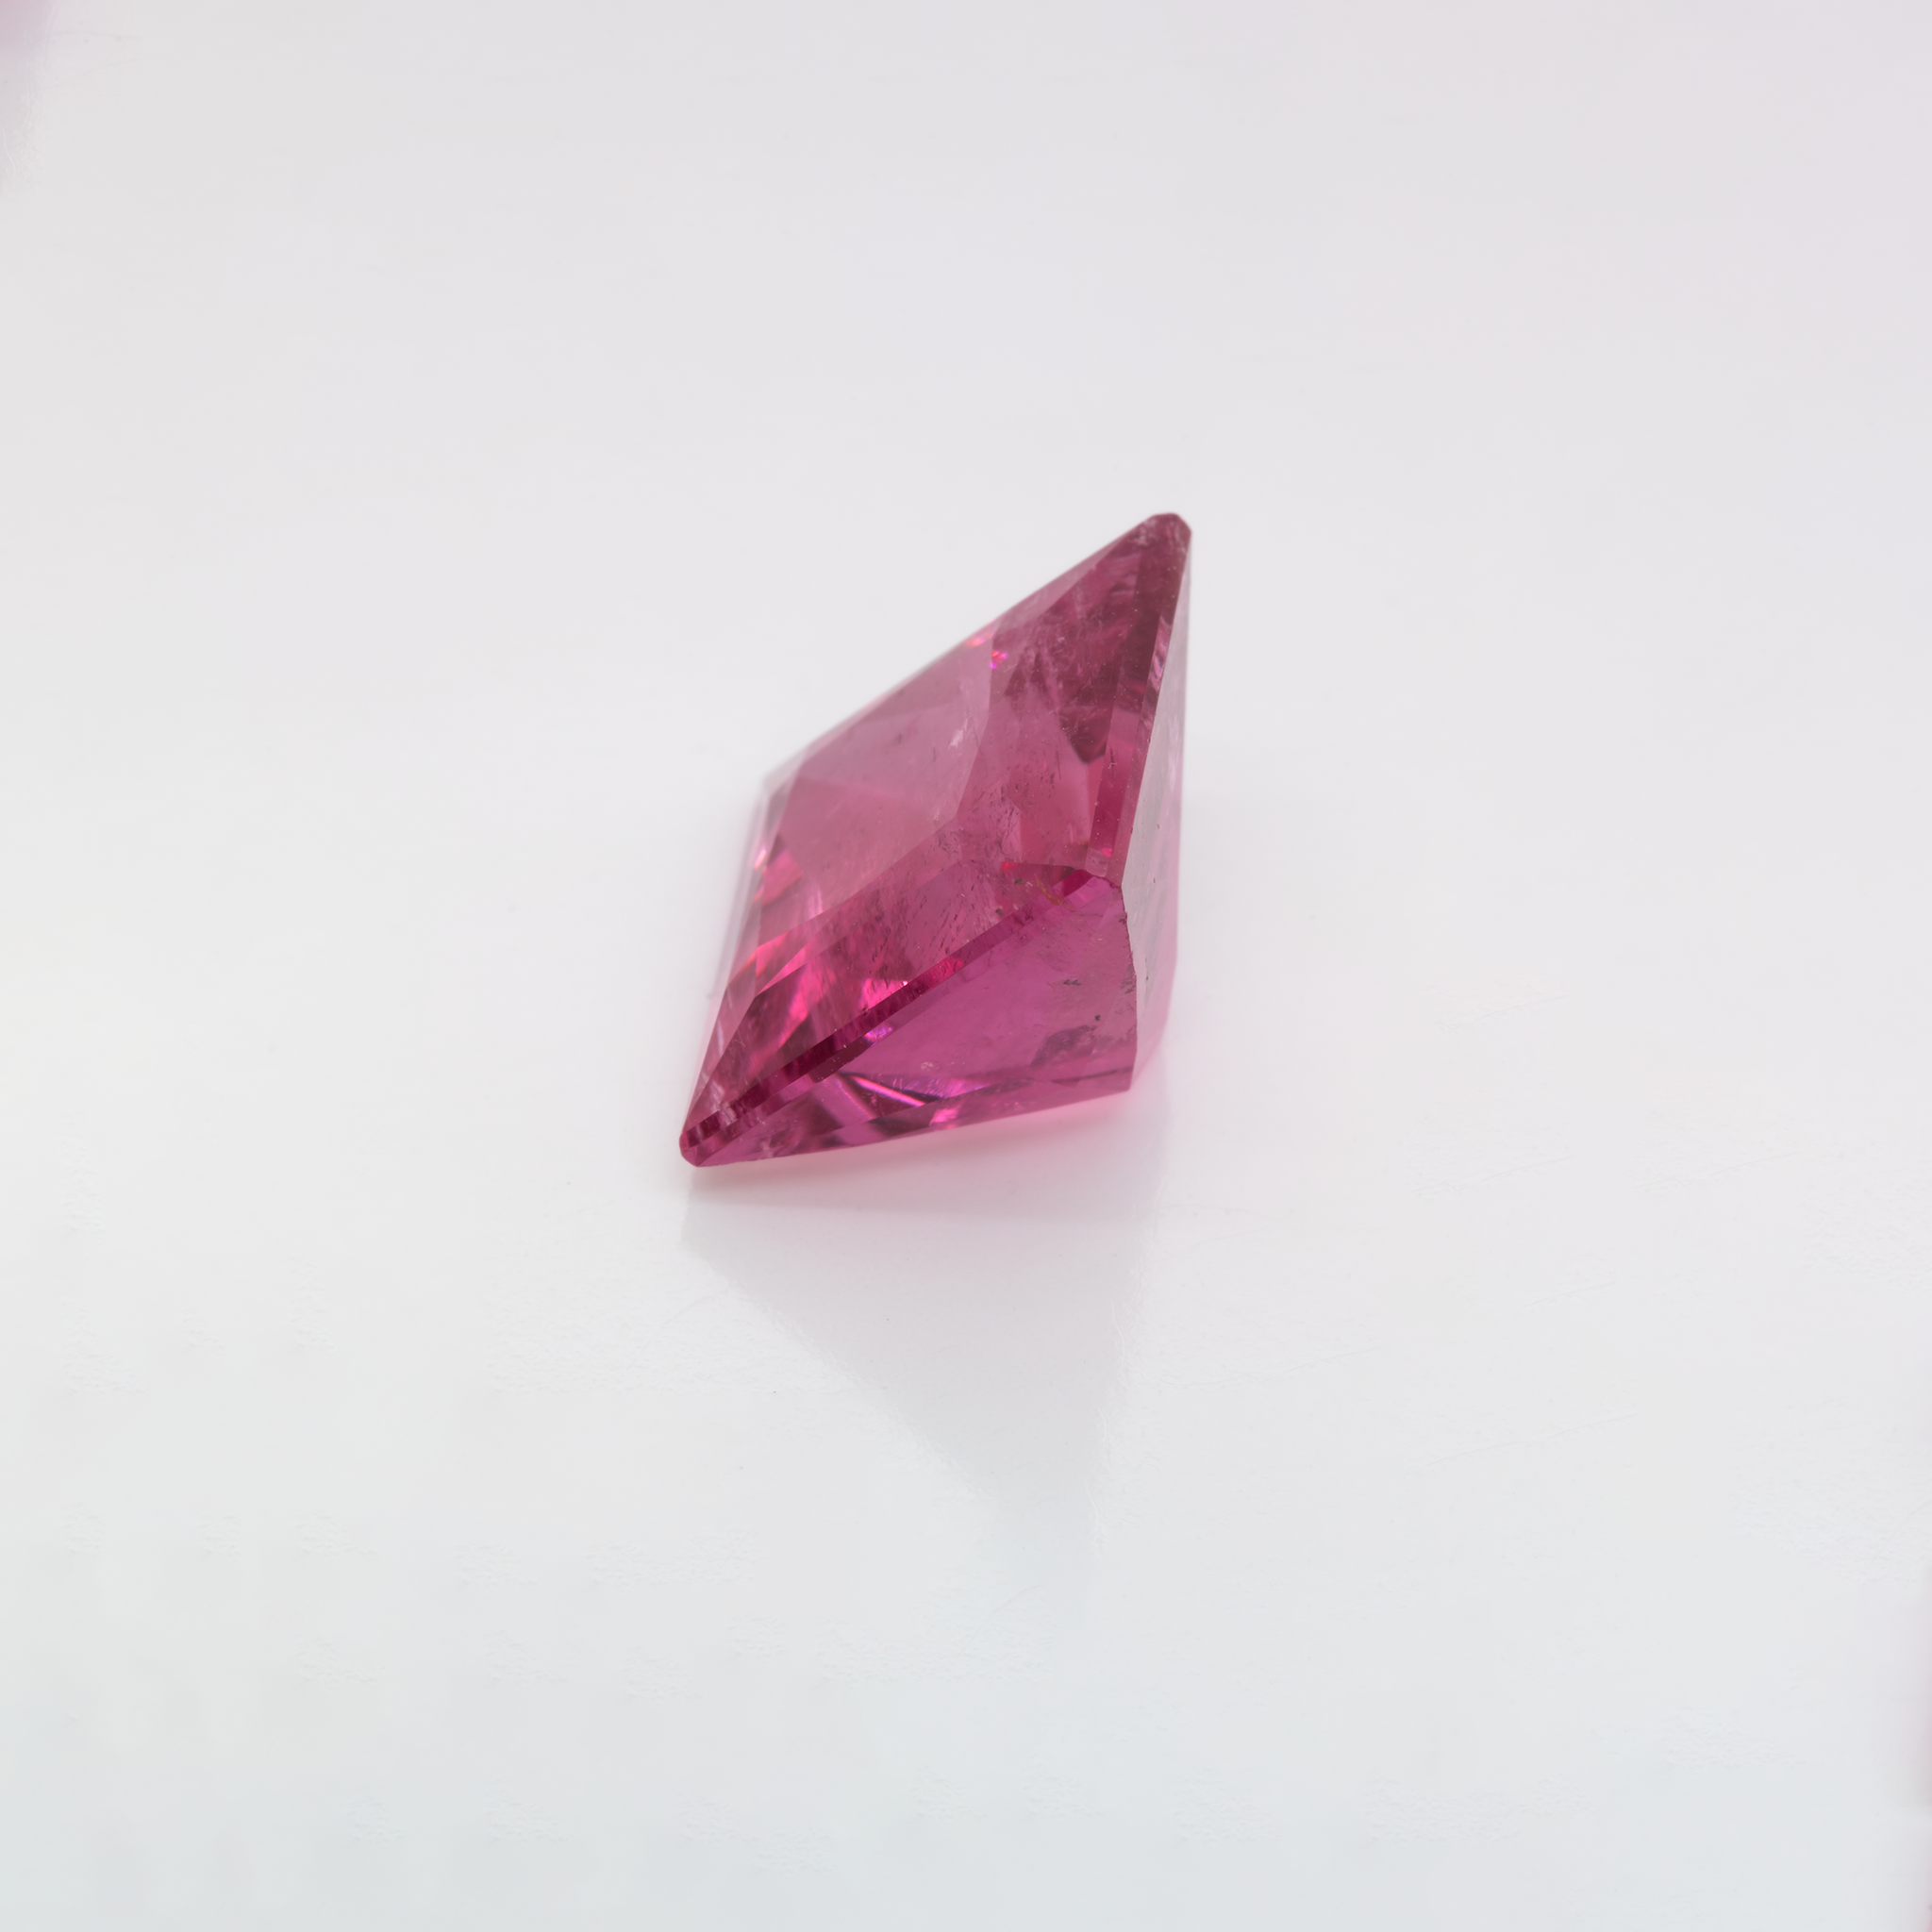 Tourmaline - pink/red, square, 14x14 mm, 13.89 cts, No. TR991016